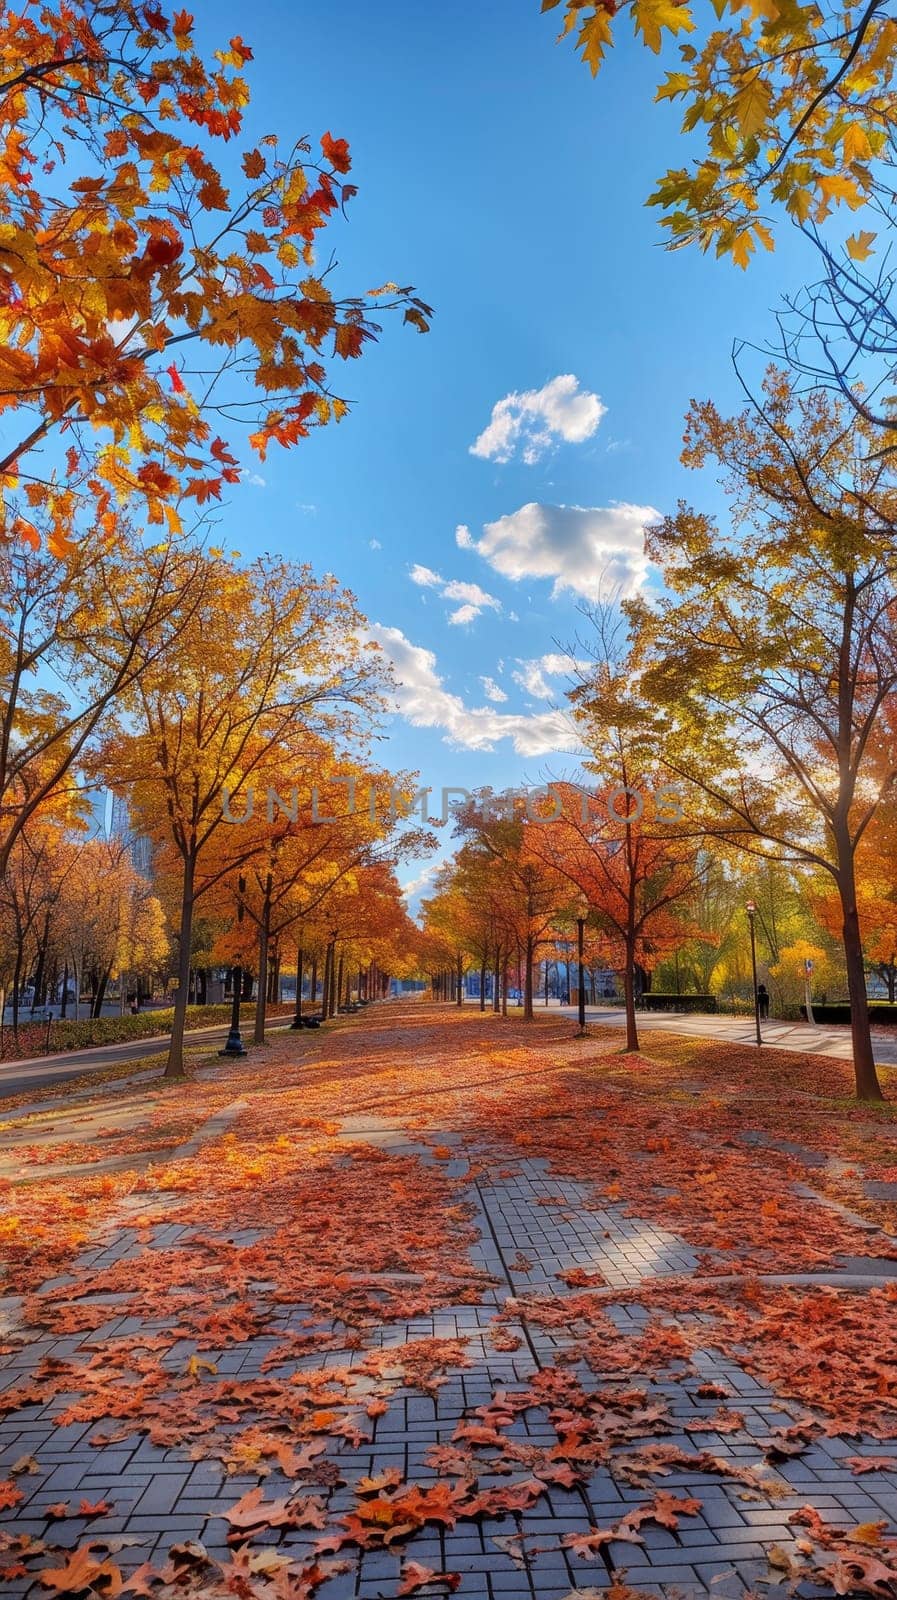 Crisp autumn leaves line the walkways of a park, with clear skies above and a vibrant display of fall colors from the surrounding trees.